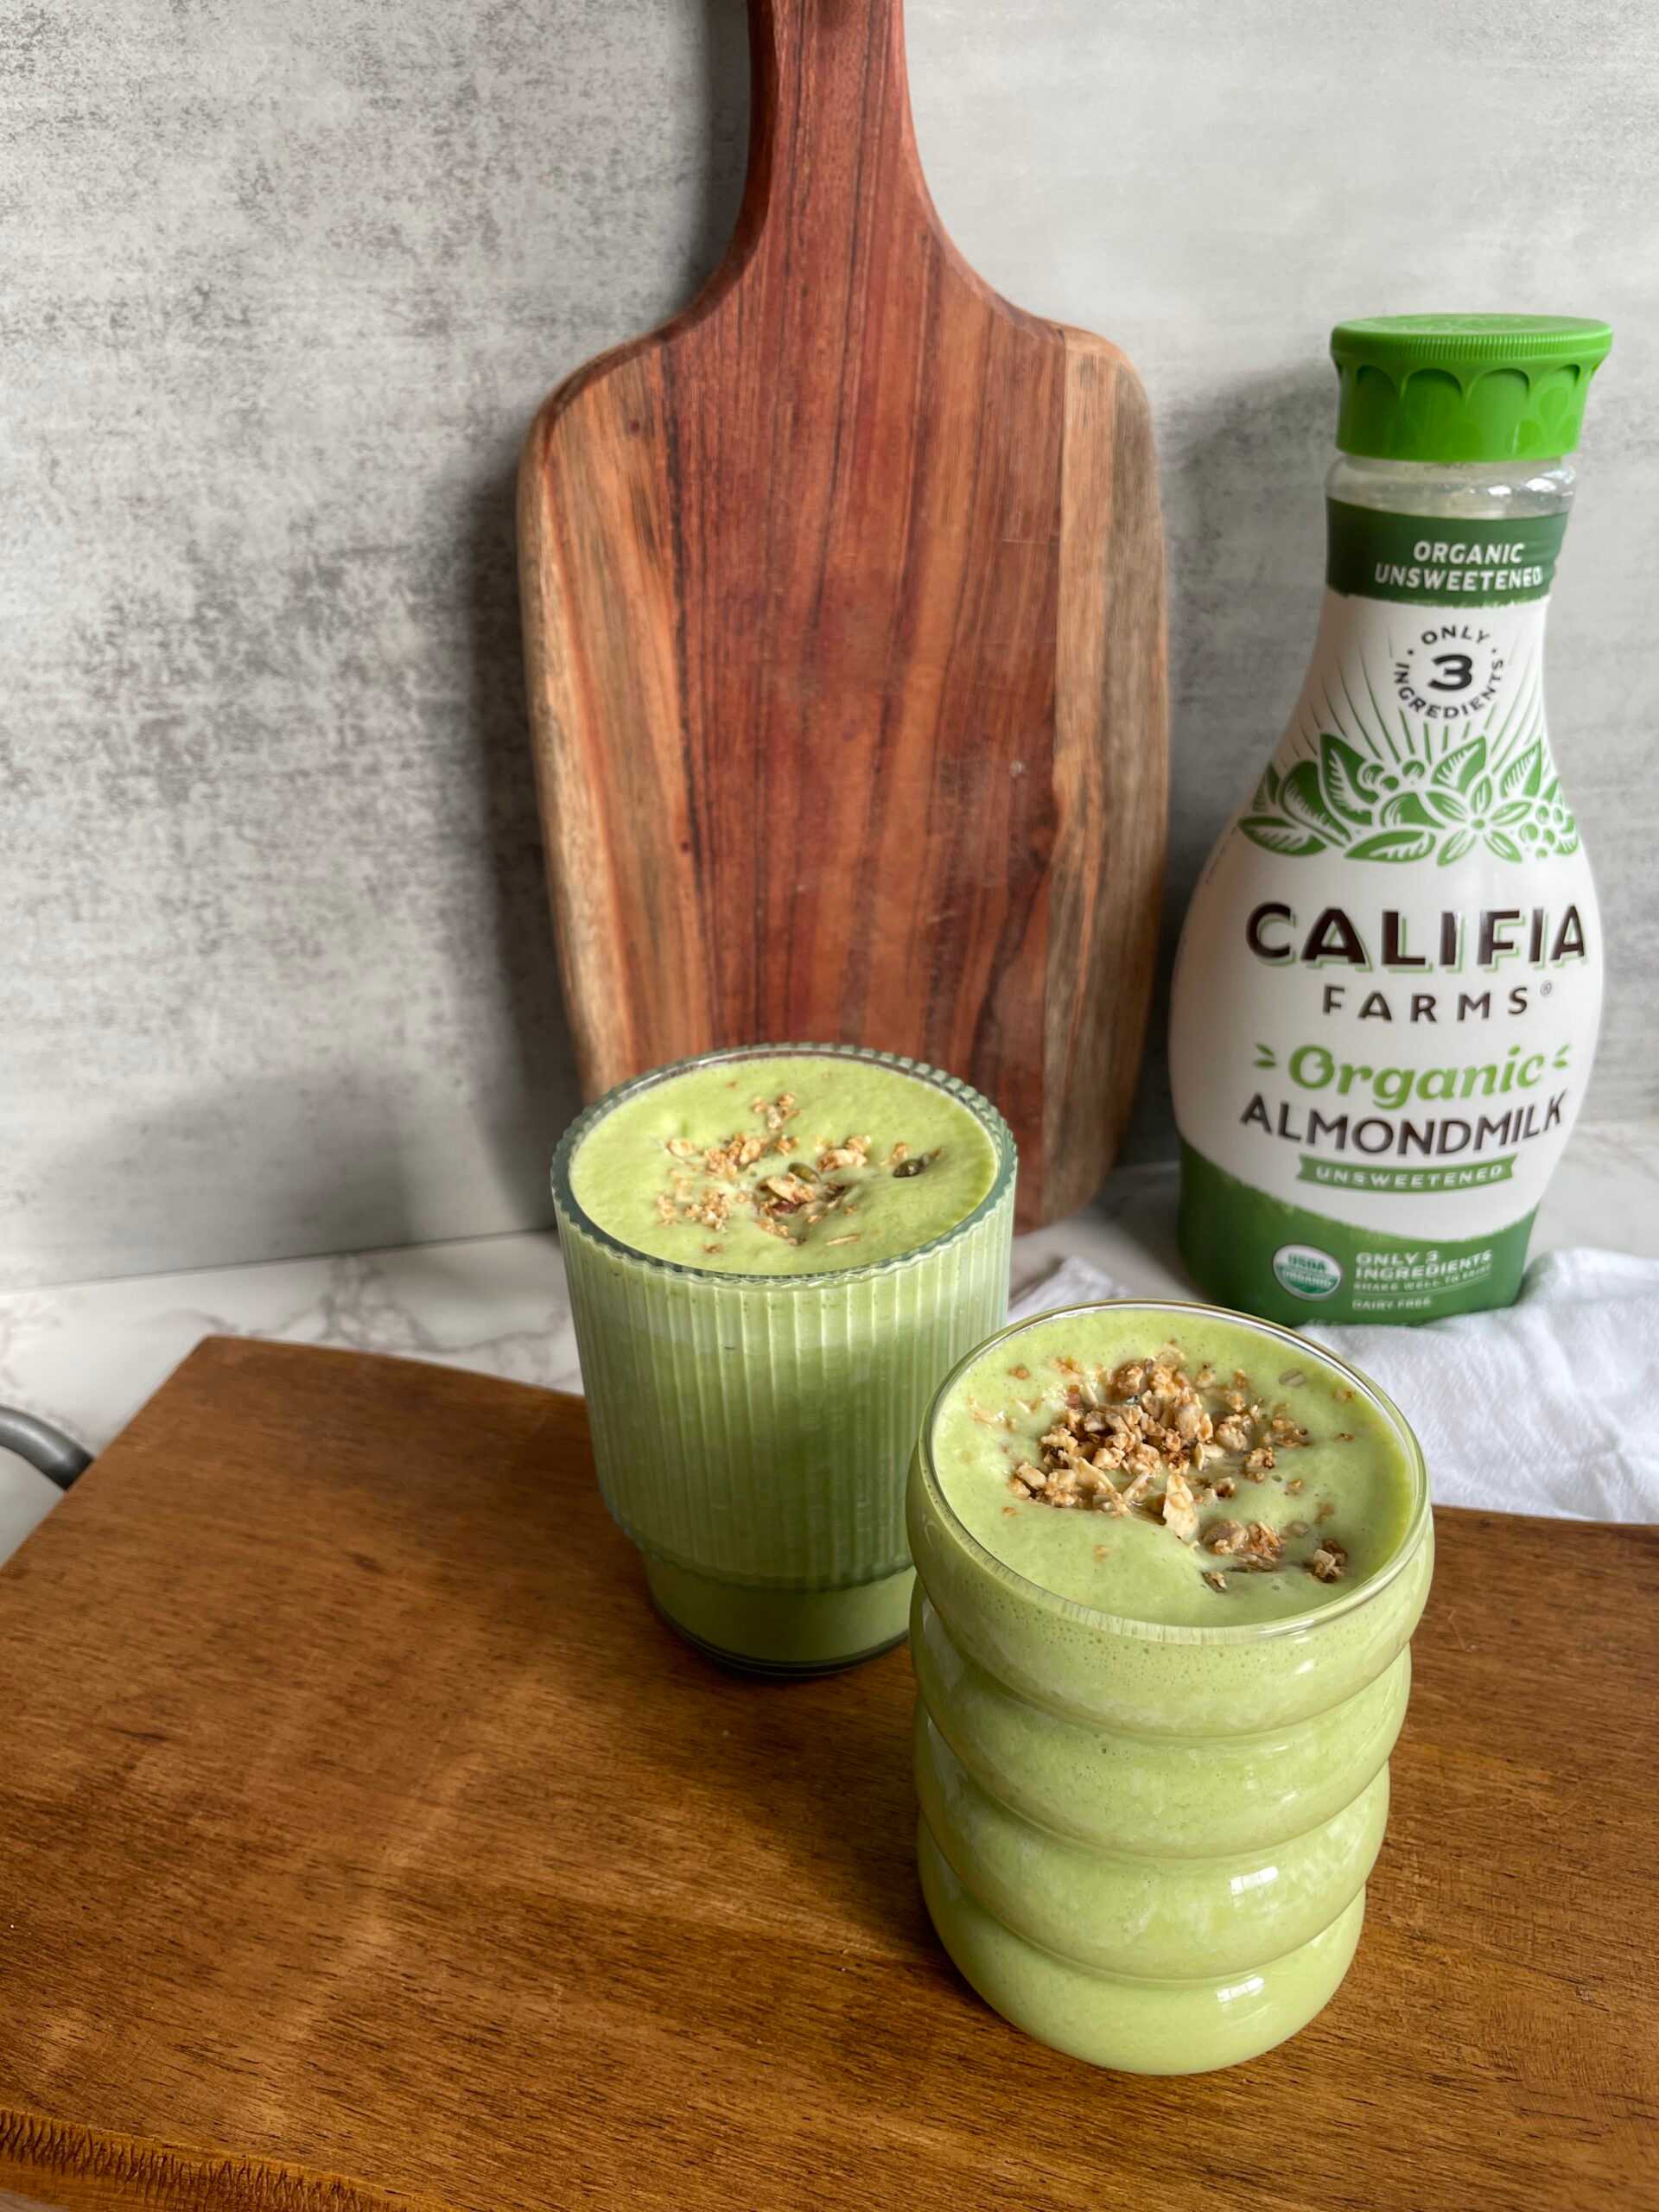 Two glasses filled with a green smoothie sit at the forefront of the image, with Califia Farms Organic Almondmilk behind.